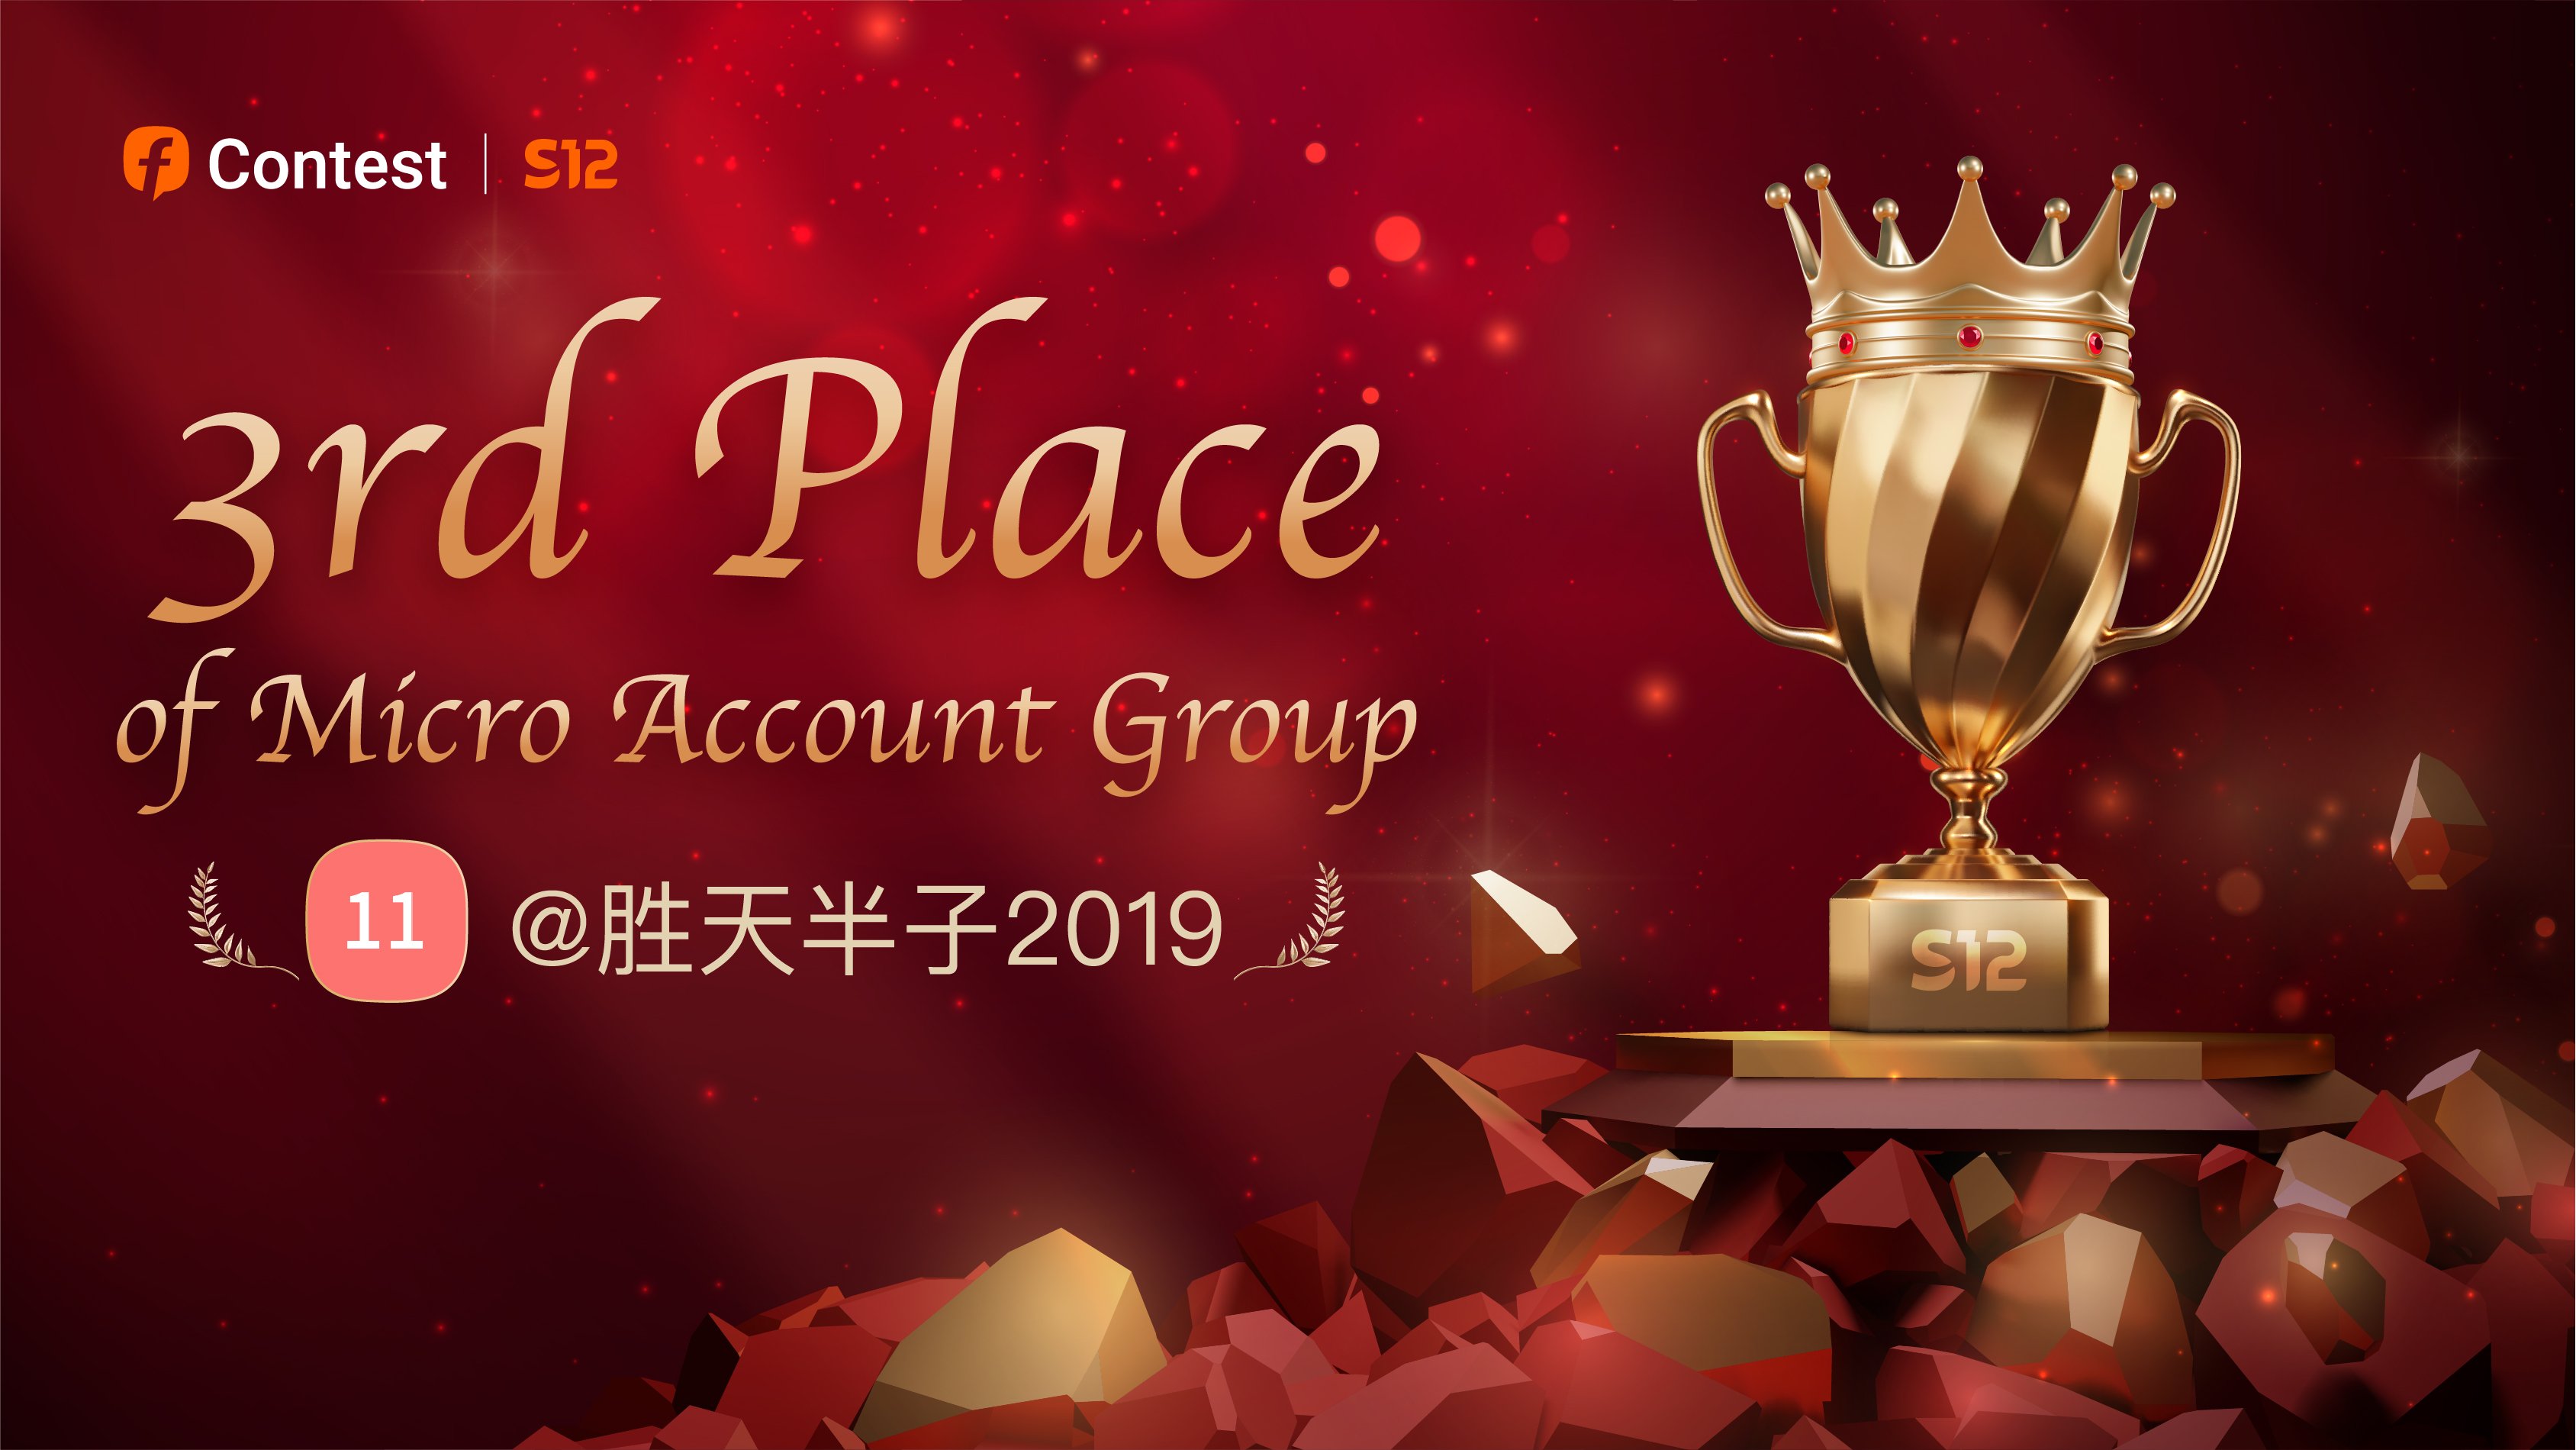 S12 | Share Moment for 3rd Place of Micro Account Group